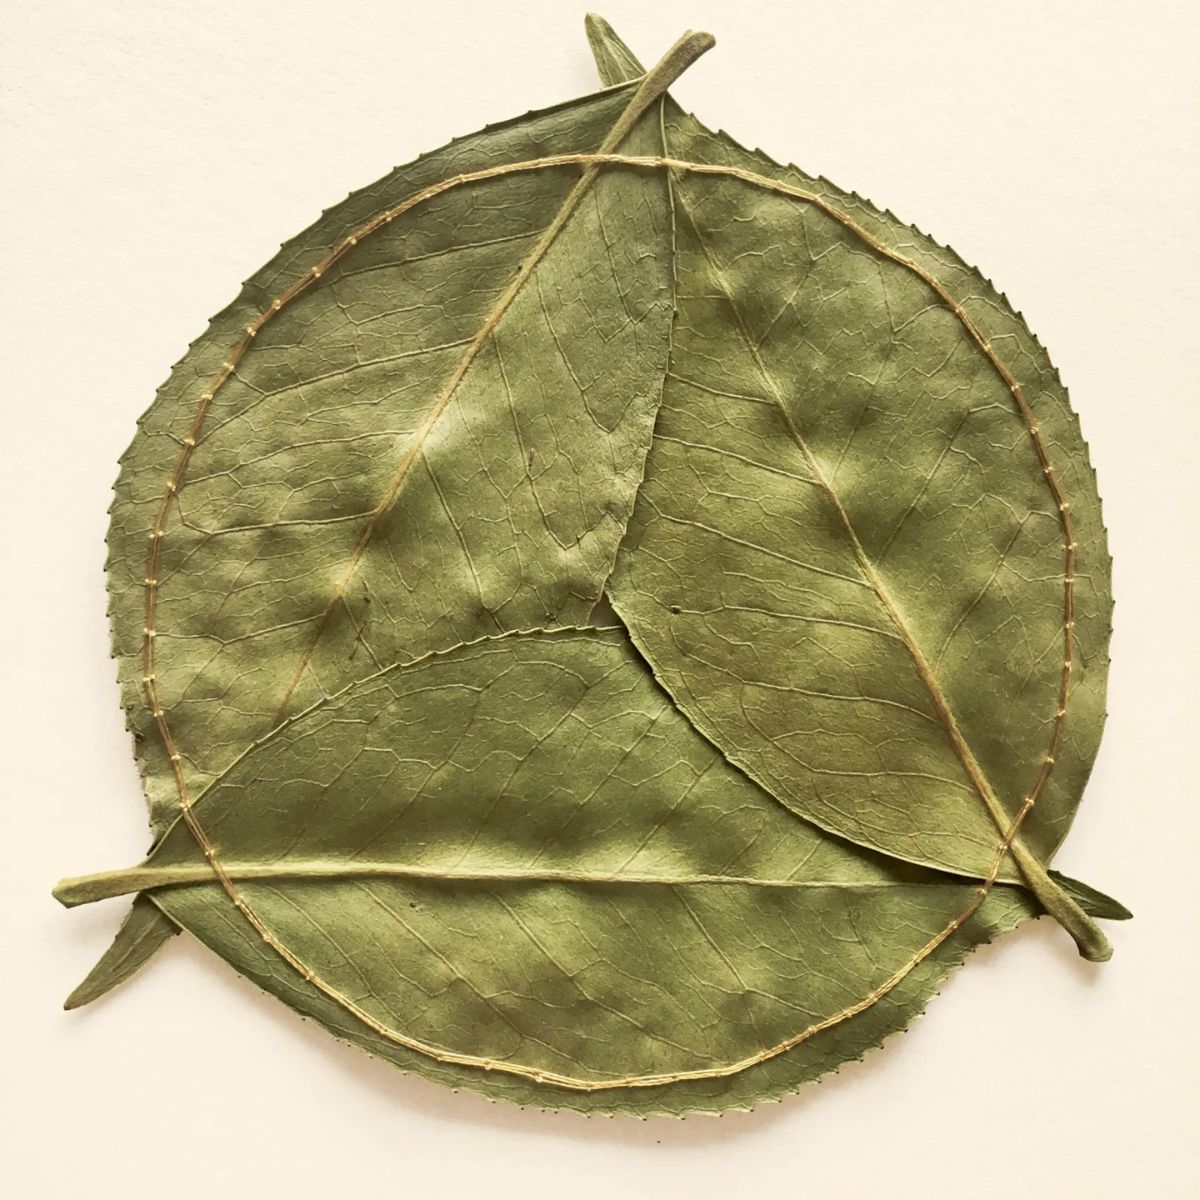 Circular embroidered design by Hillary Waters Fayle on Thursd